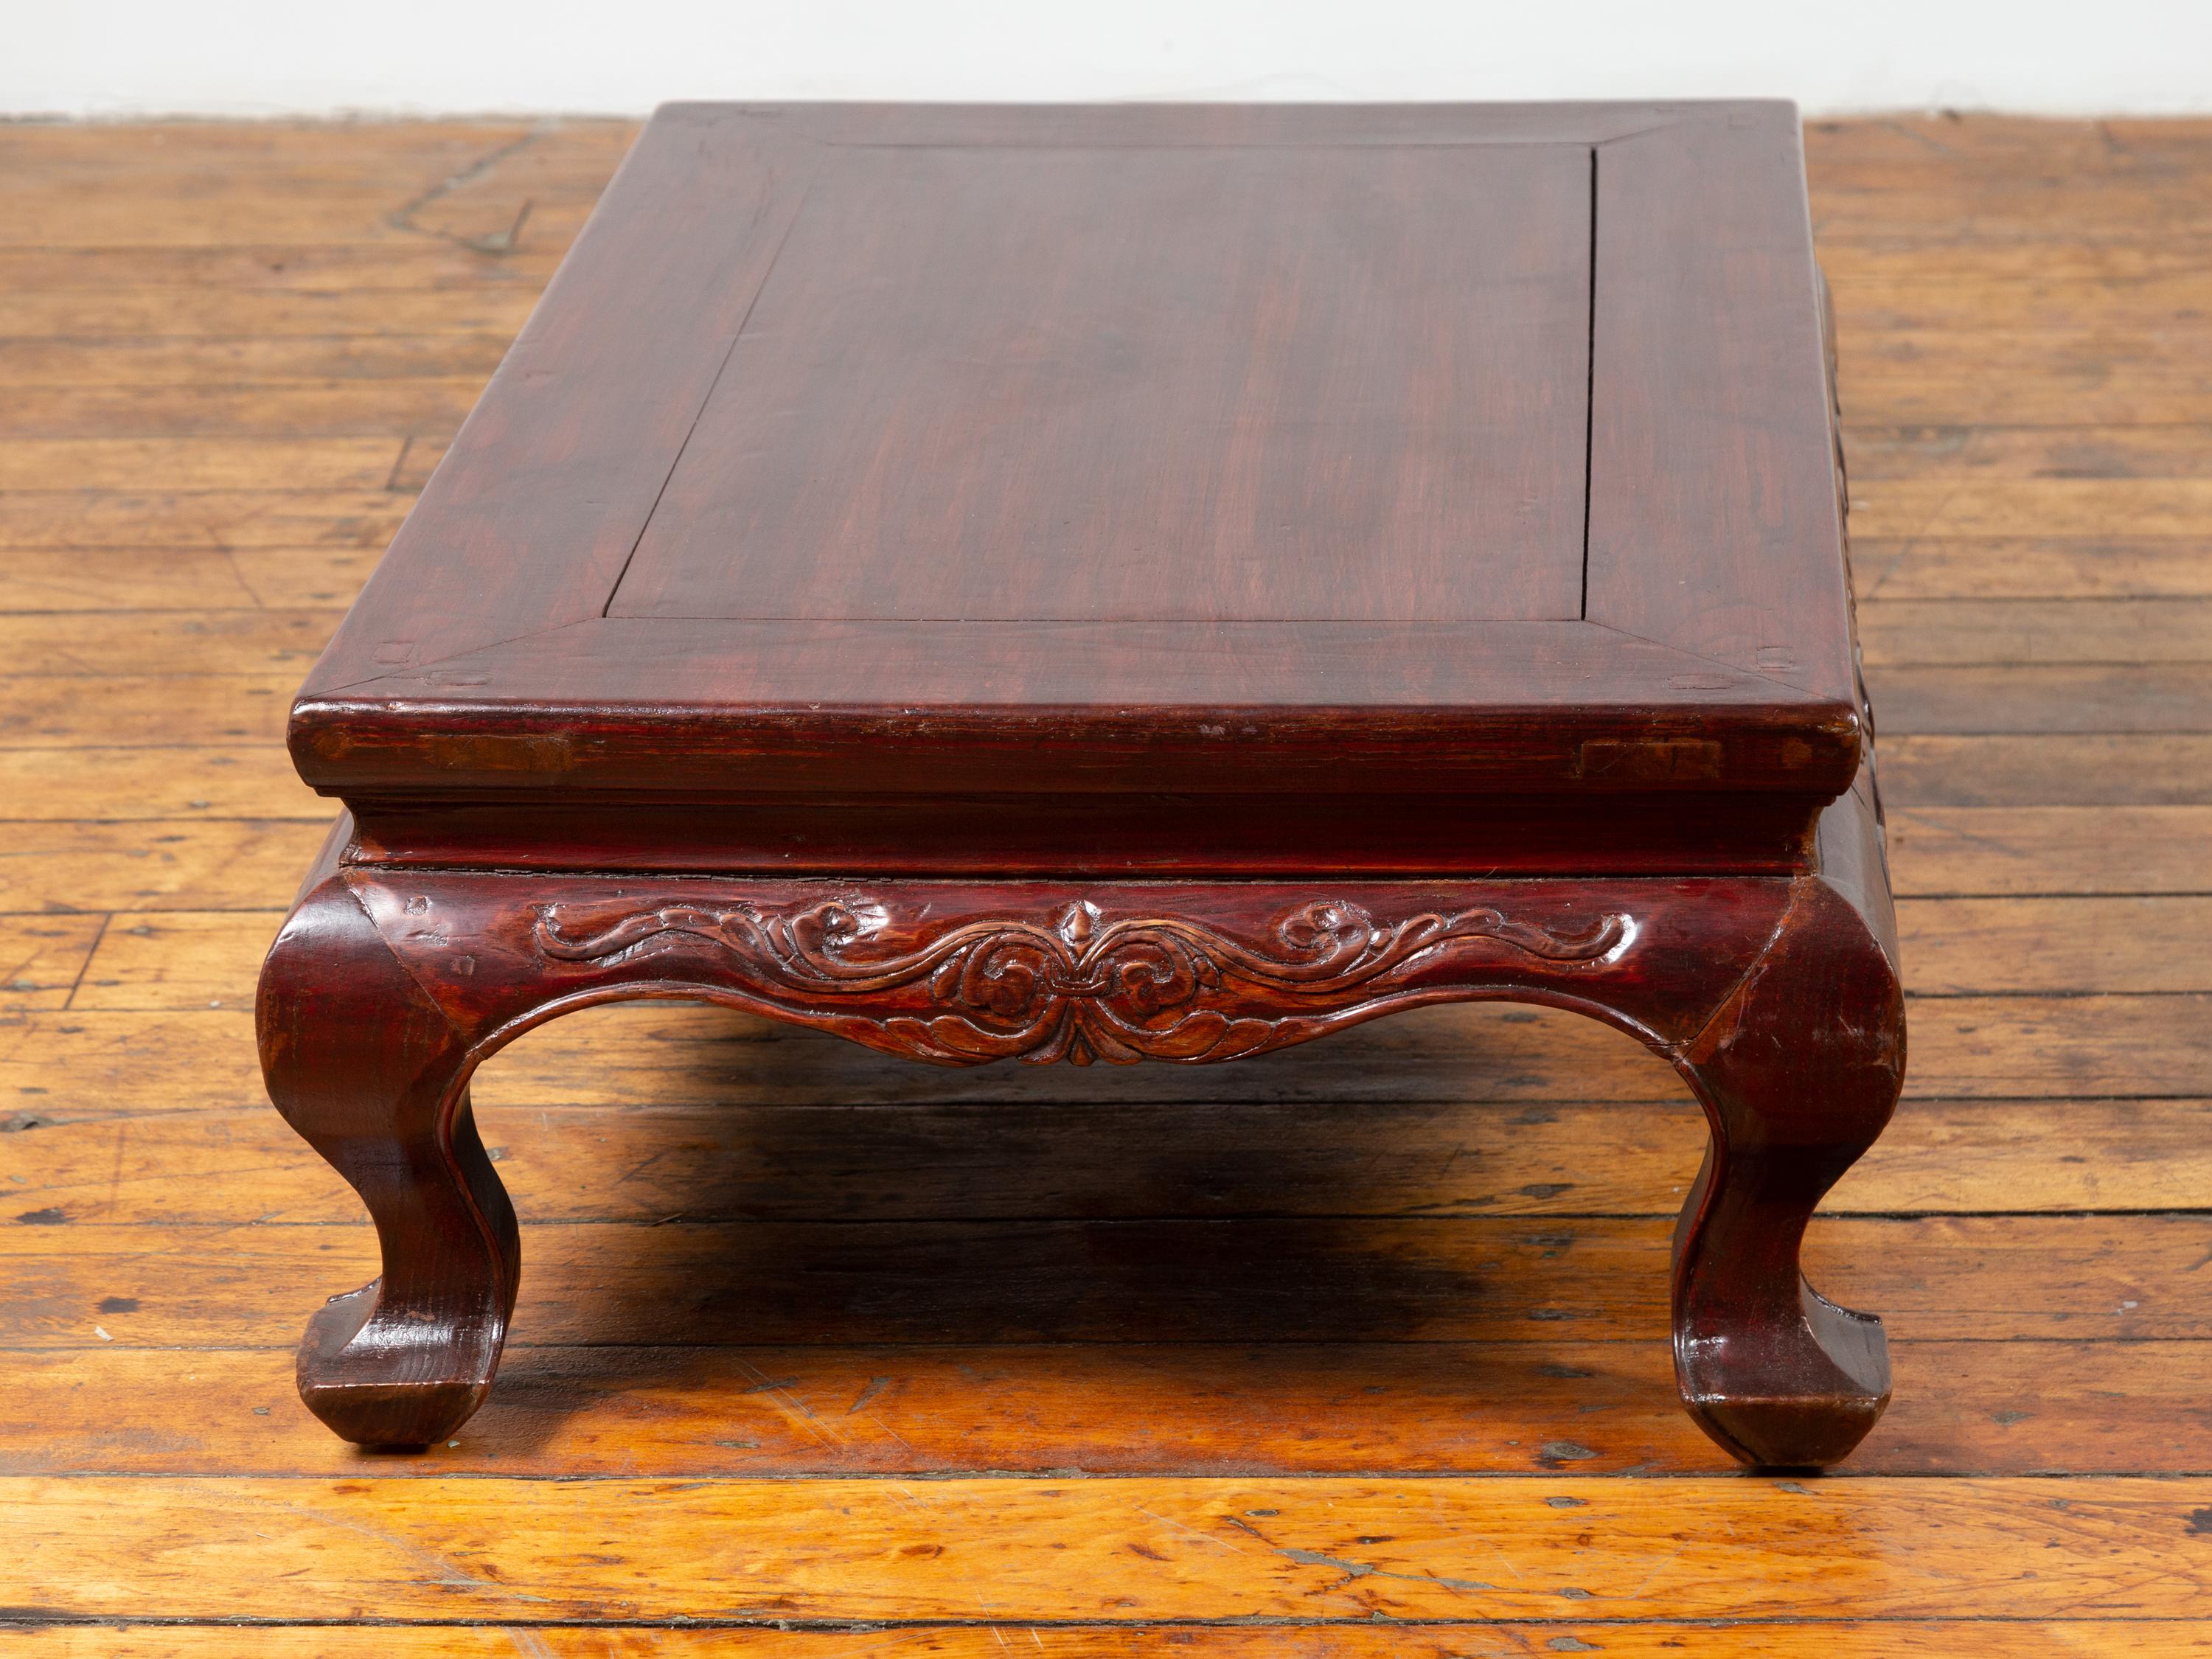 Chinese Qing Dynasty 19th Century Lacquered Wood Low Table with Cabriole Legs For Sale 4